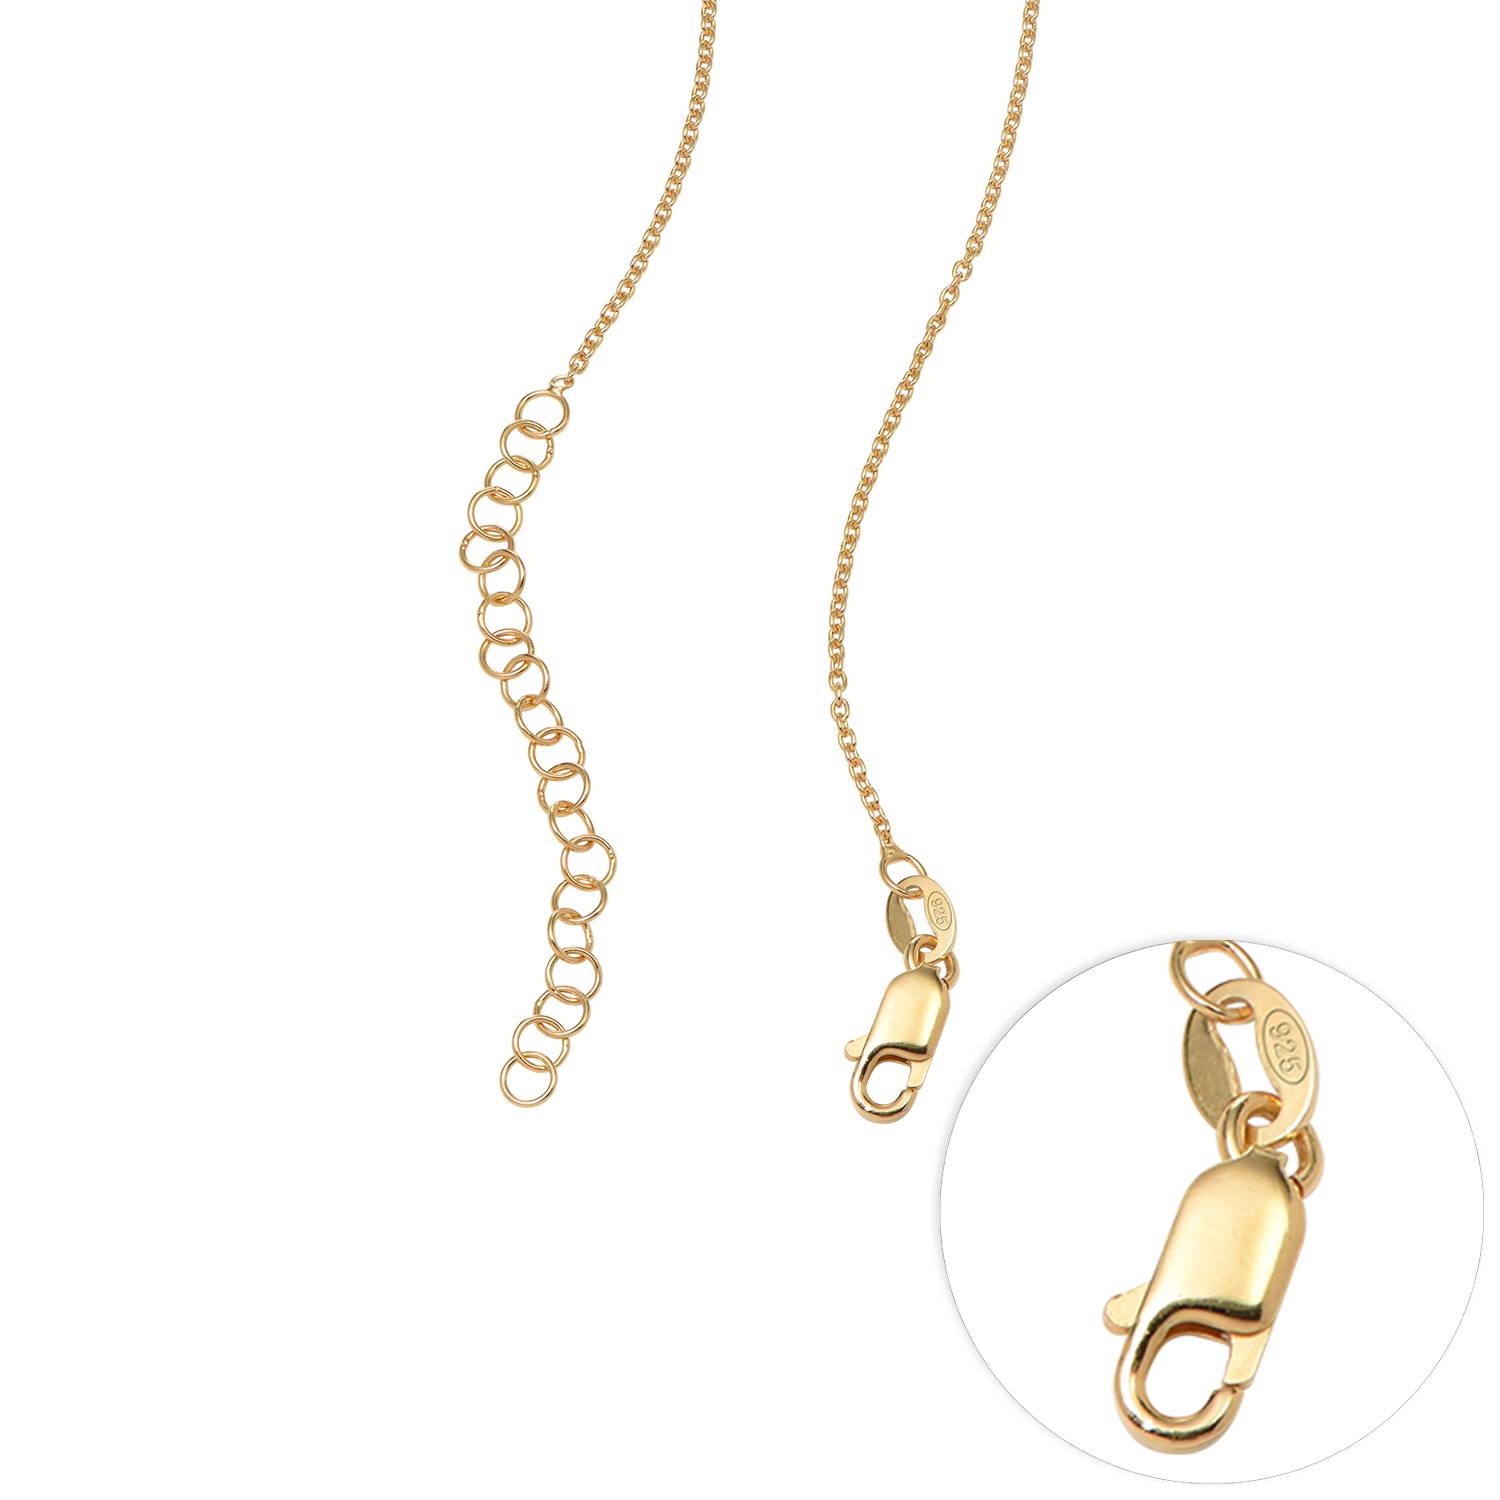 Couple's Infinity Necklace With Birthstones In Gold Vermeil-3 product photo